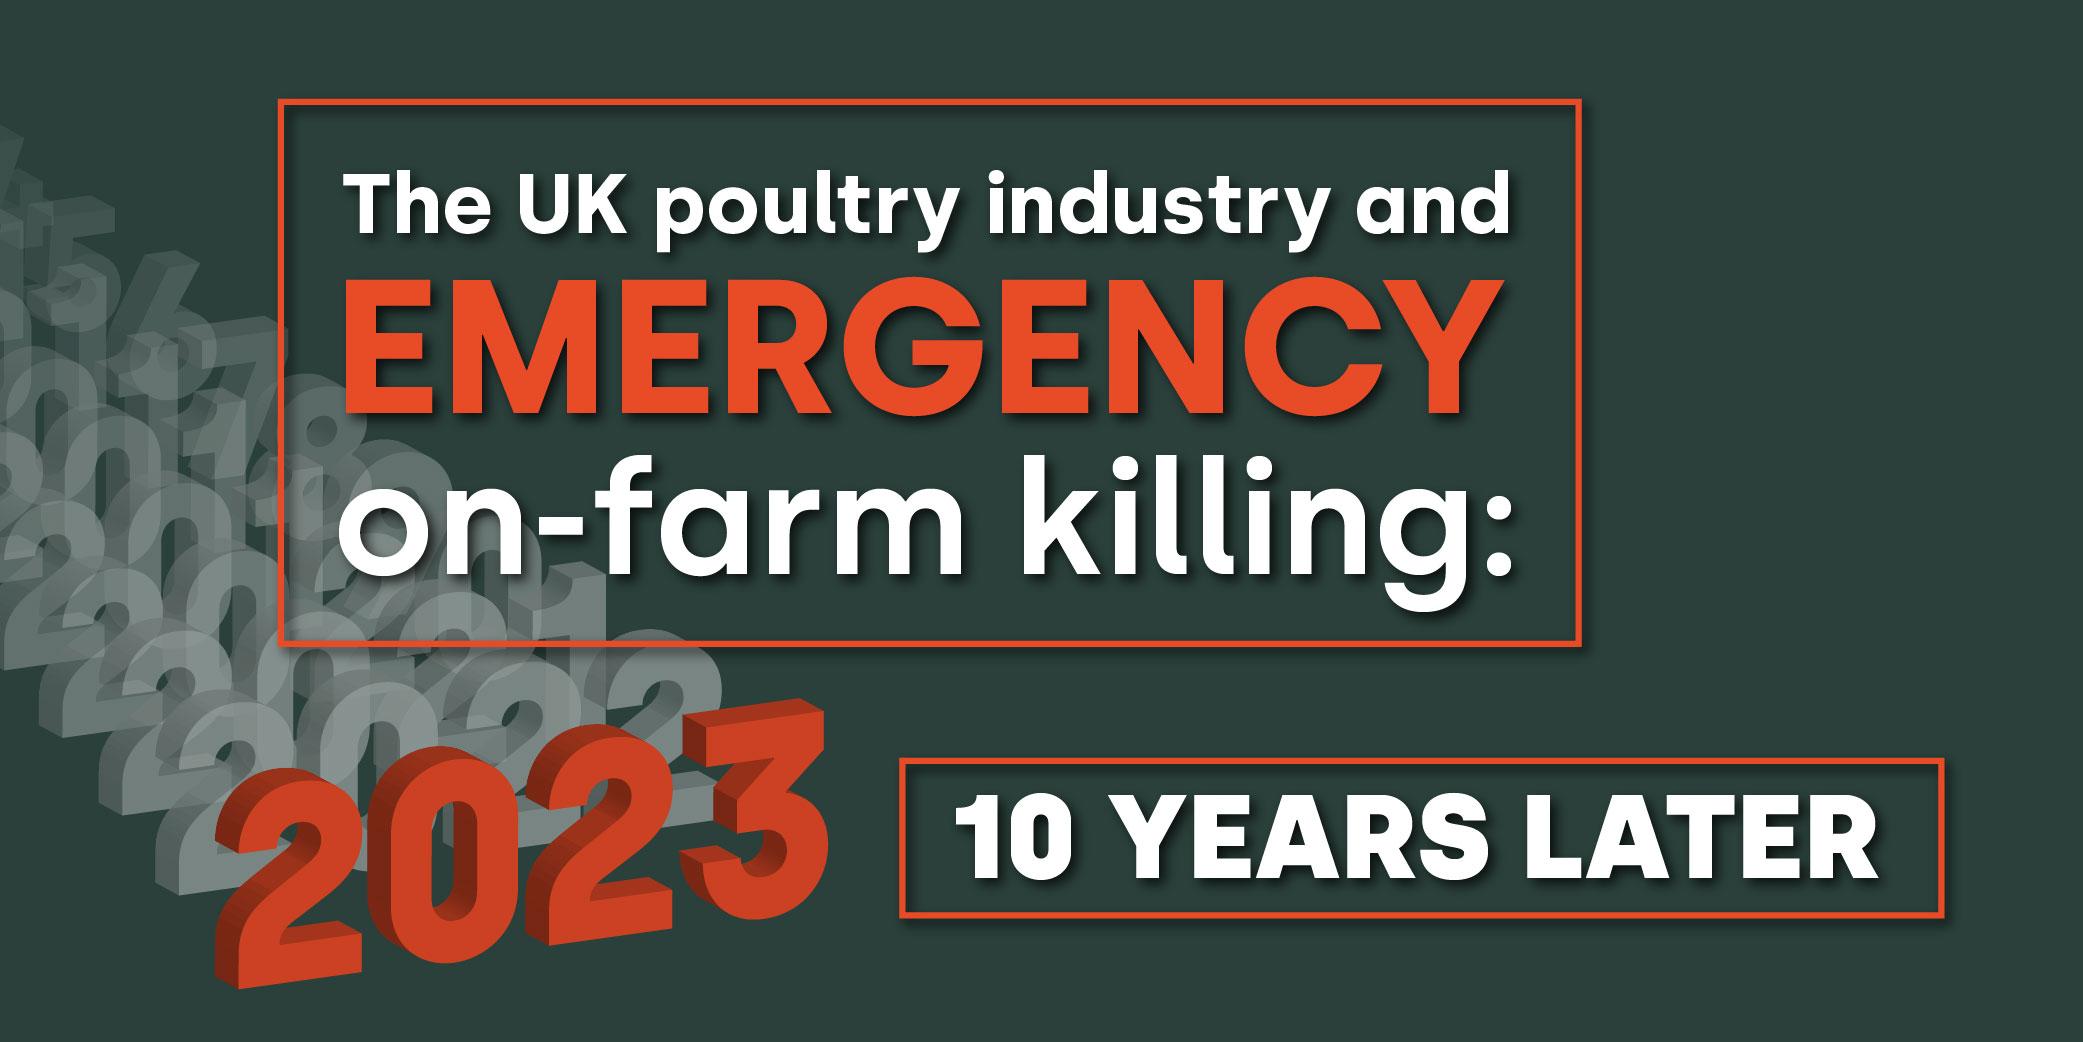 Where is the UK poultry industry for emergency on-farm killing? blog graphic